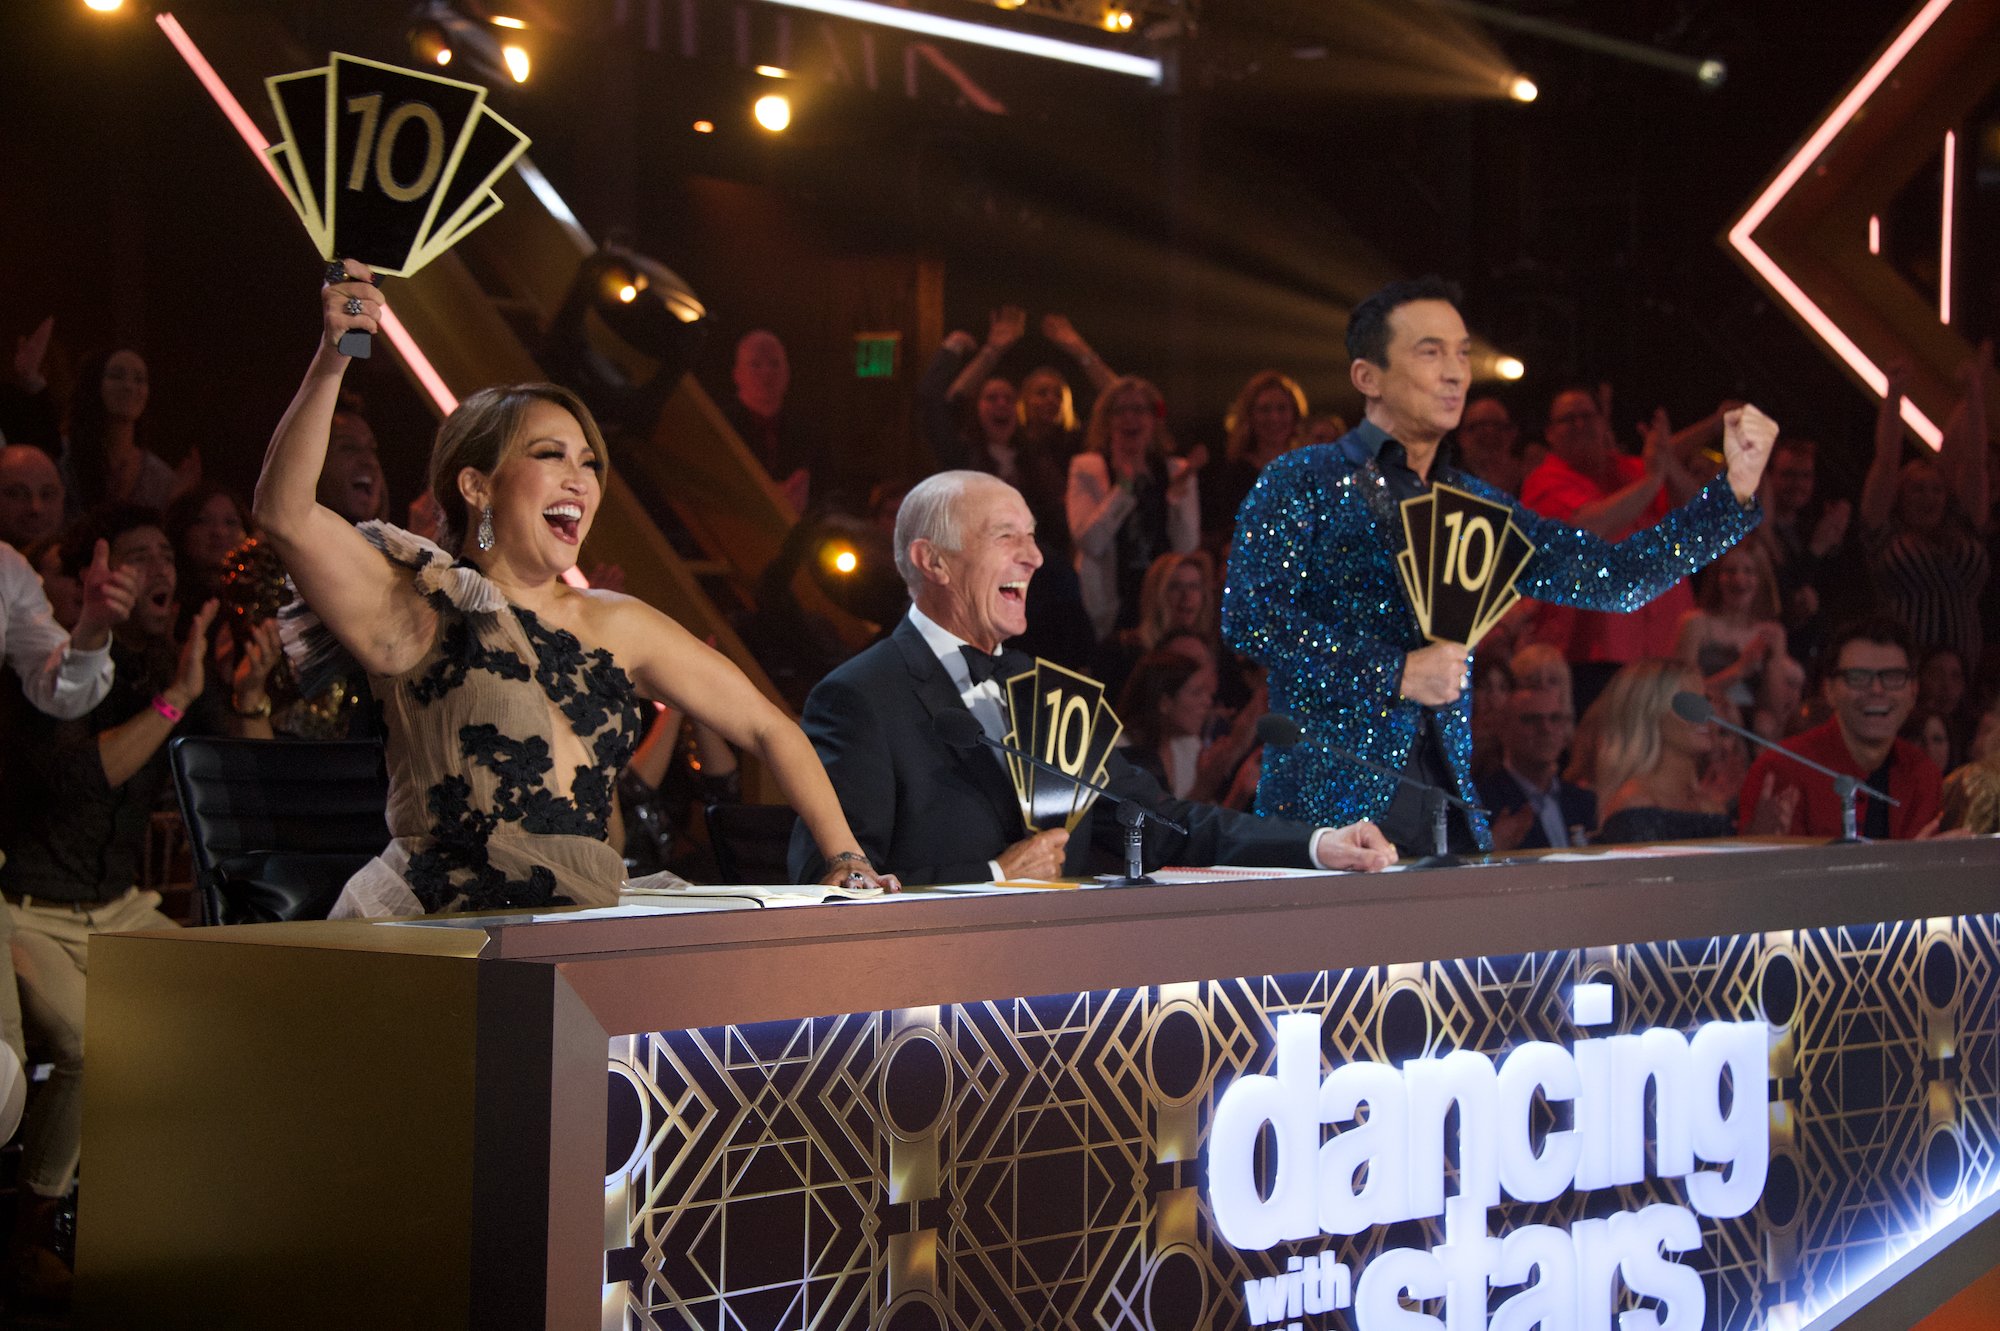 Carrie Ann Inaba, Len Goodman, and Bruno Tonioli at the judges panel during the 2019 finale of 'Dancing With the Stars'